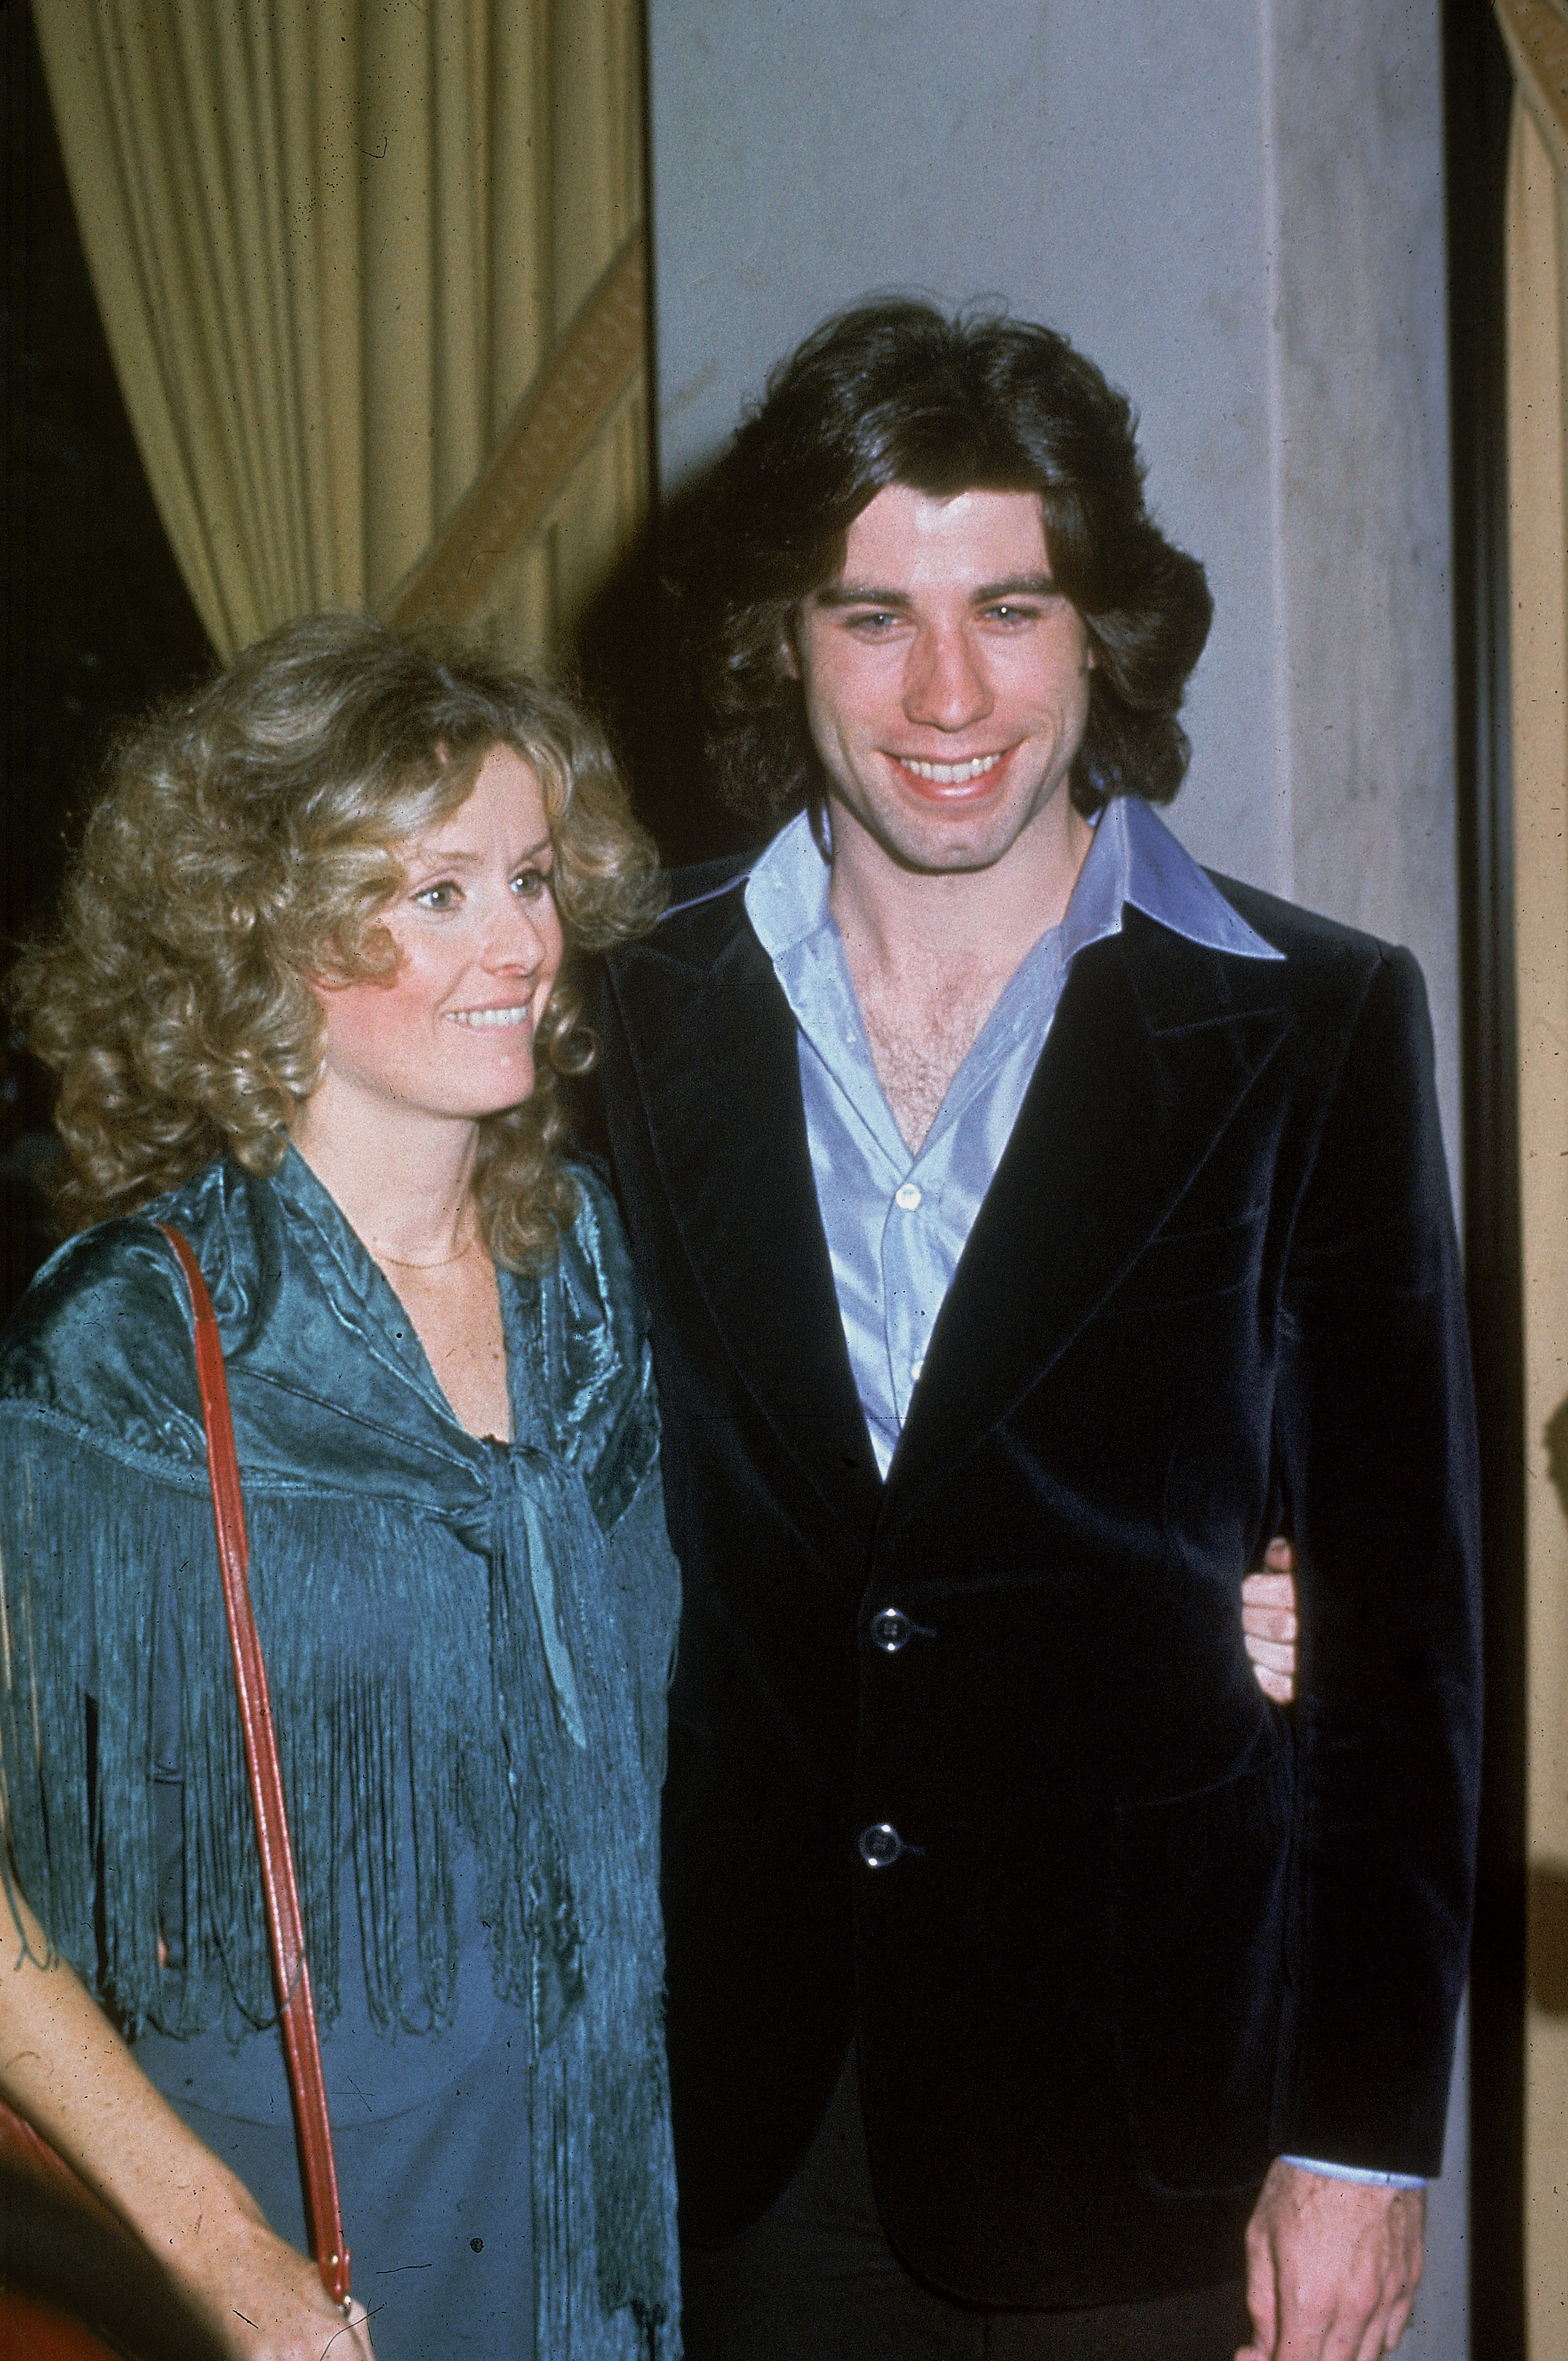 John Travolta and Dianna Hyland at the Golden Apple Awards in 1976 | Source: Getty Images